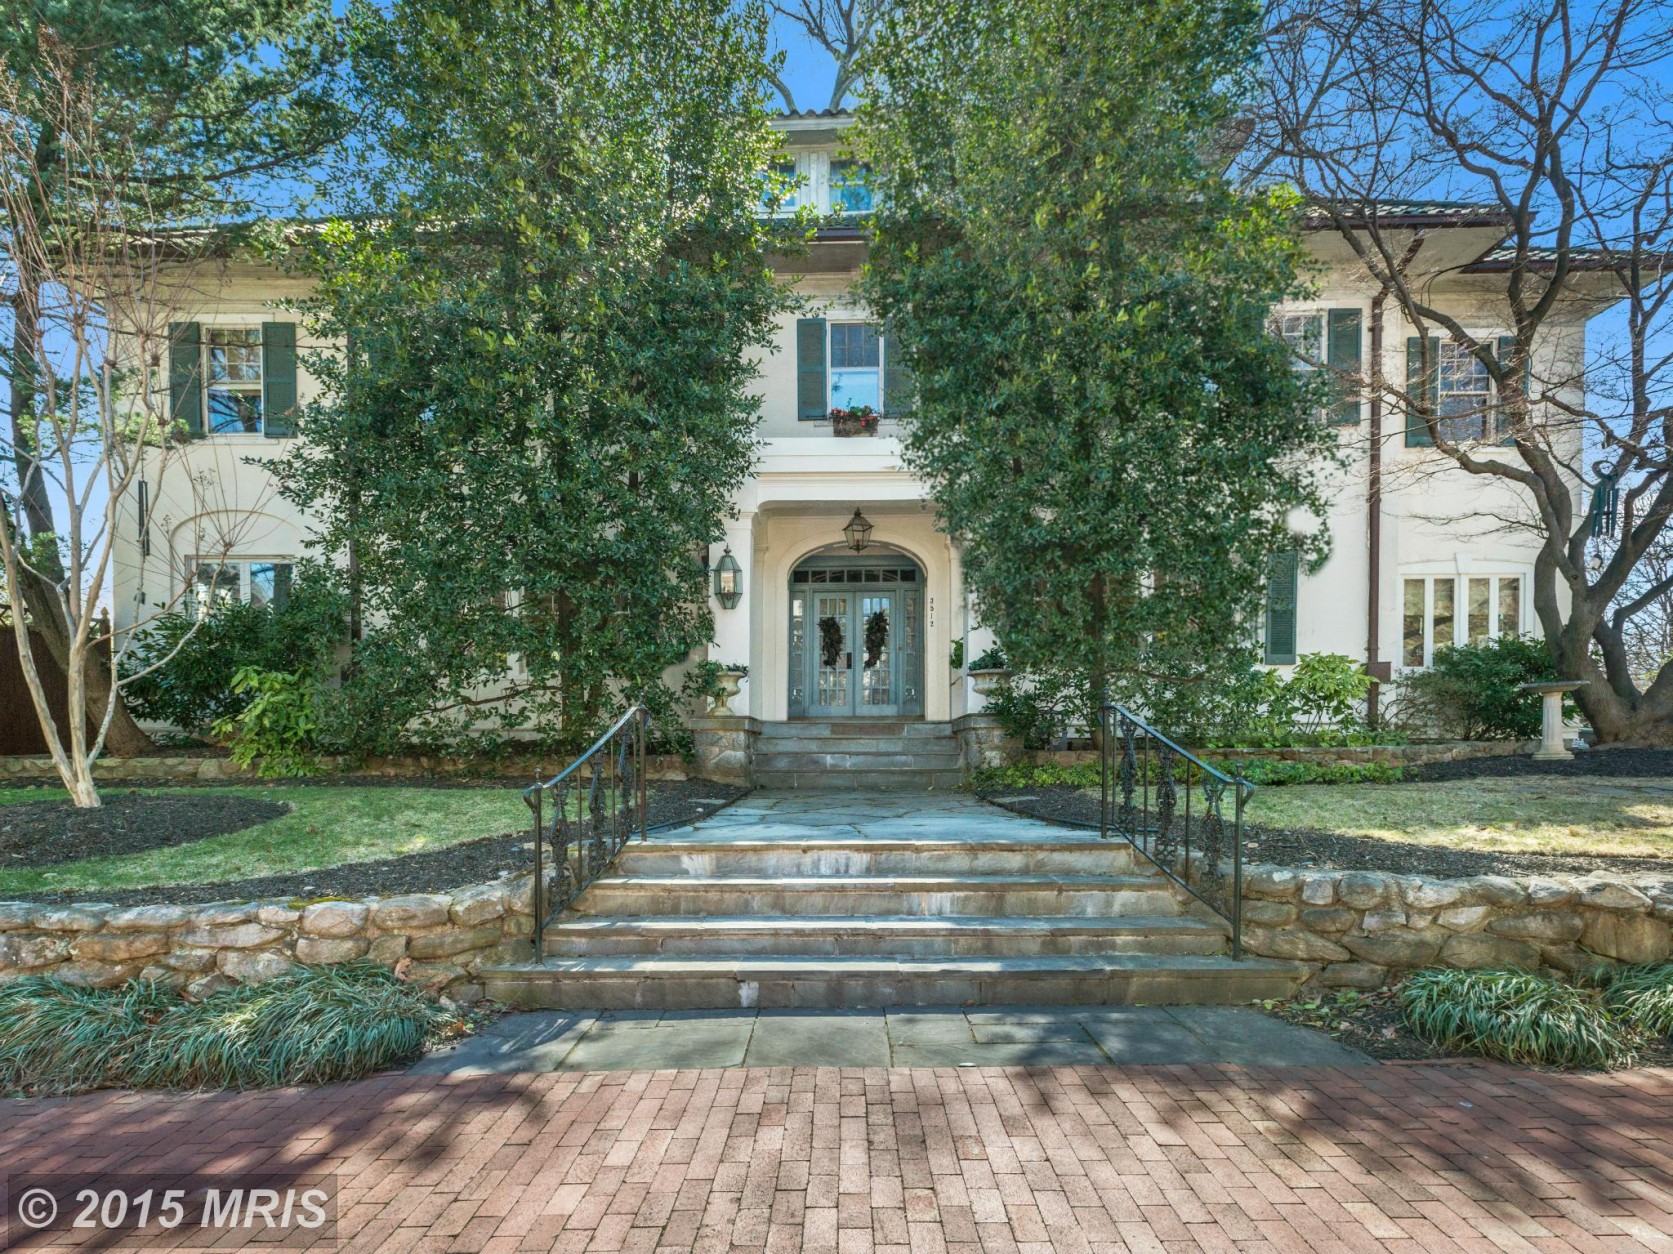 #4. This home, located at 3512 Lowell Street NW, Washington D.C., sold for $6.3 million. (Metropolitan Regional Information Systems, Inc./Metropolitan Regional Information Systems, Inc.)